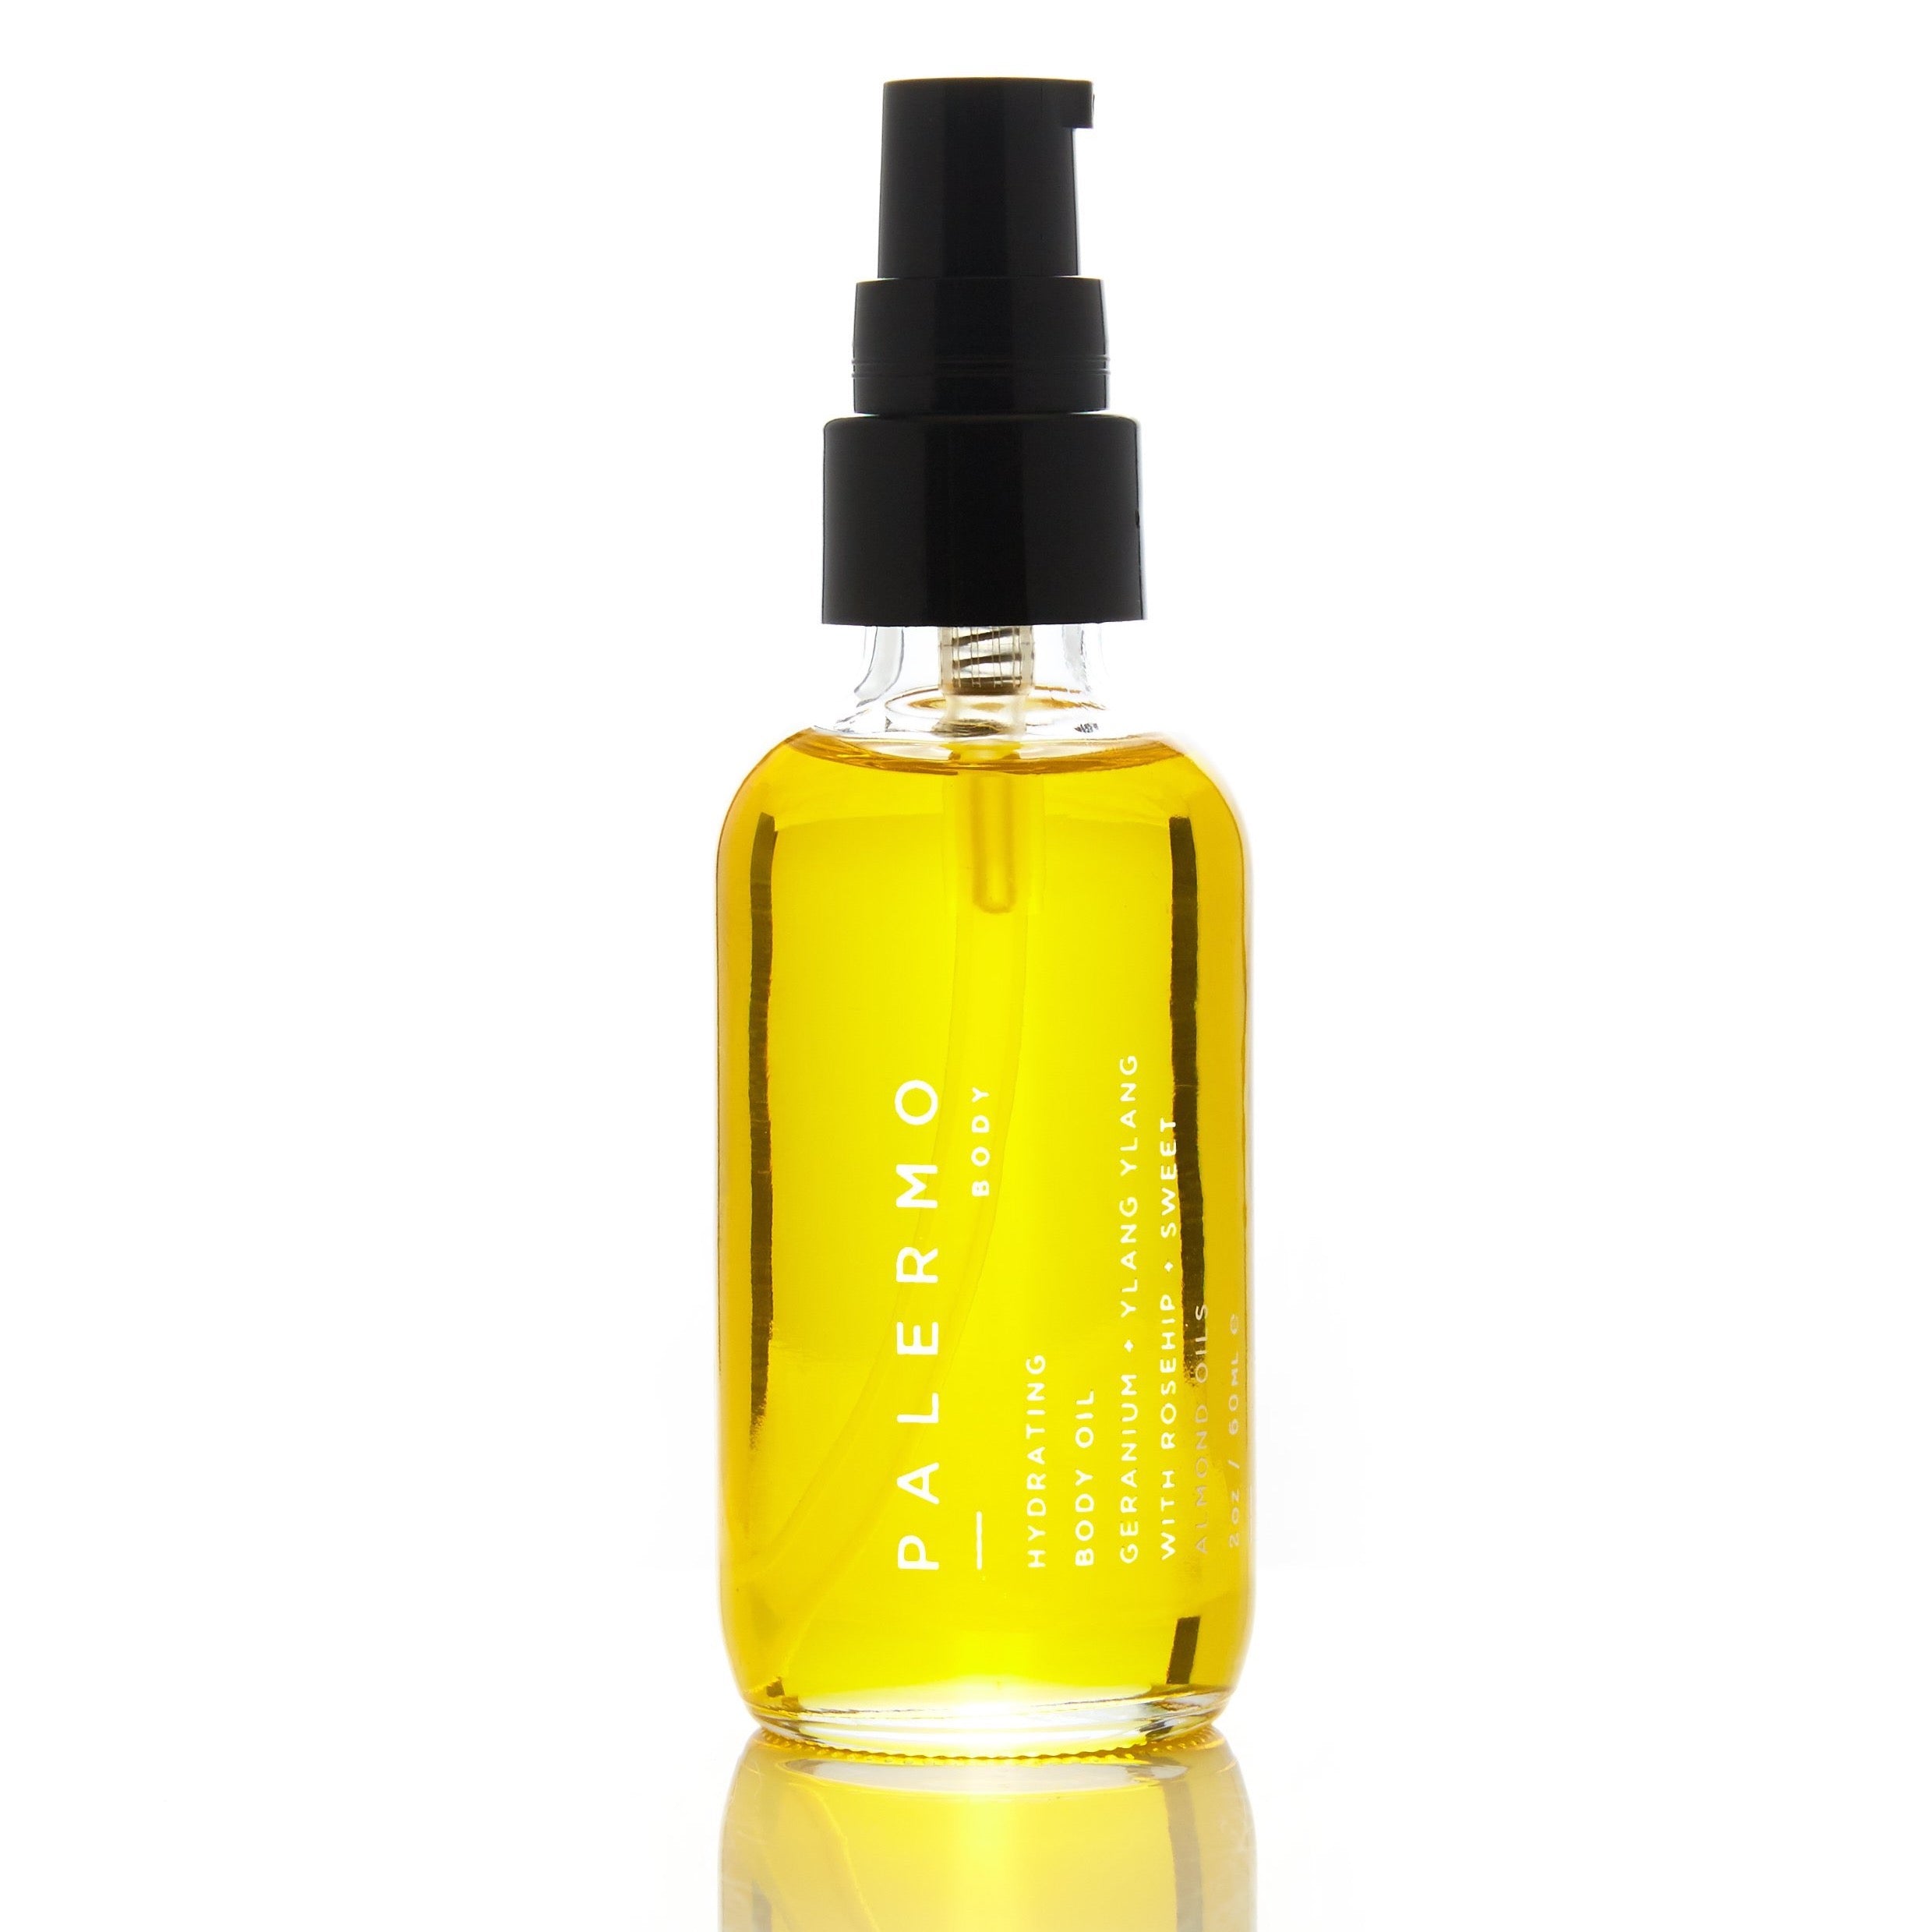 Hydrating Body Oil-Geranium + Ylang Ylang - Best Clean Beauty Body Oil